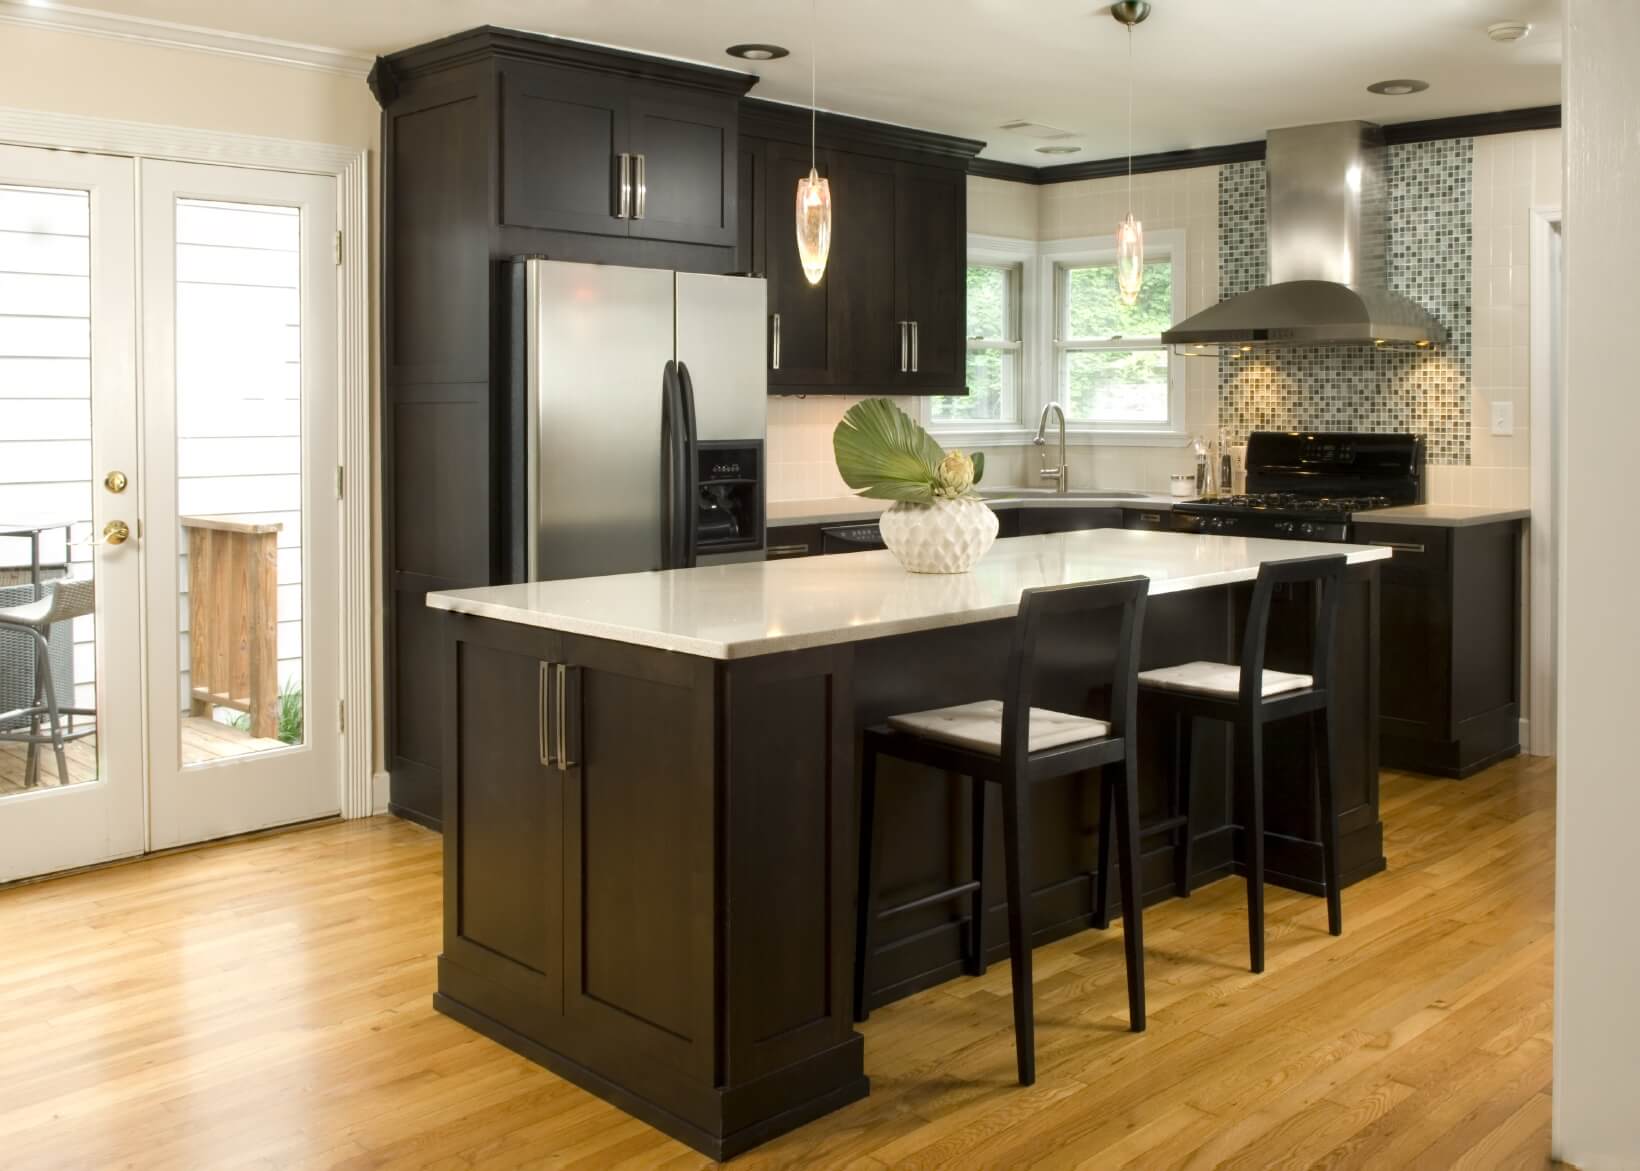 RTA Kitchen Cabinets: Why You should Use Them in Your Kitchen